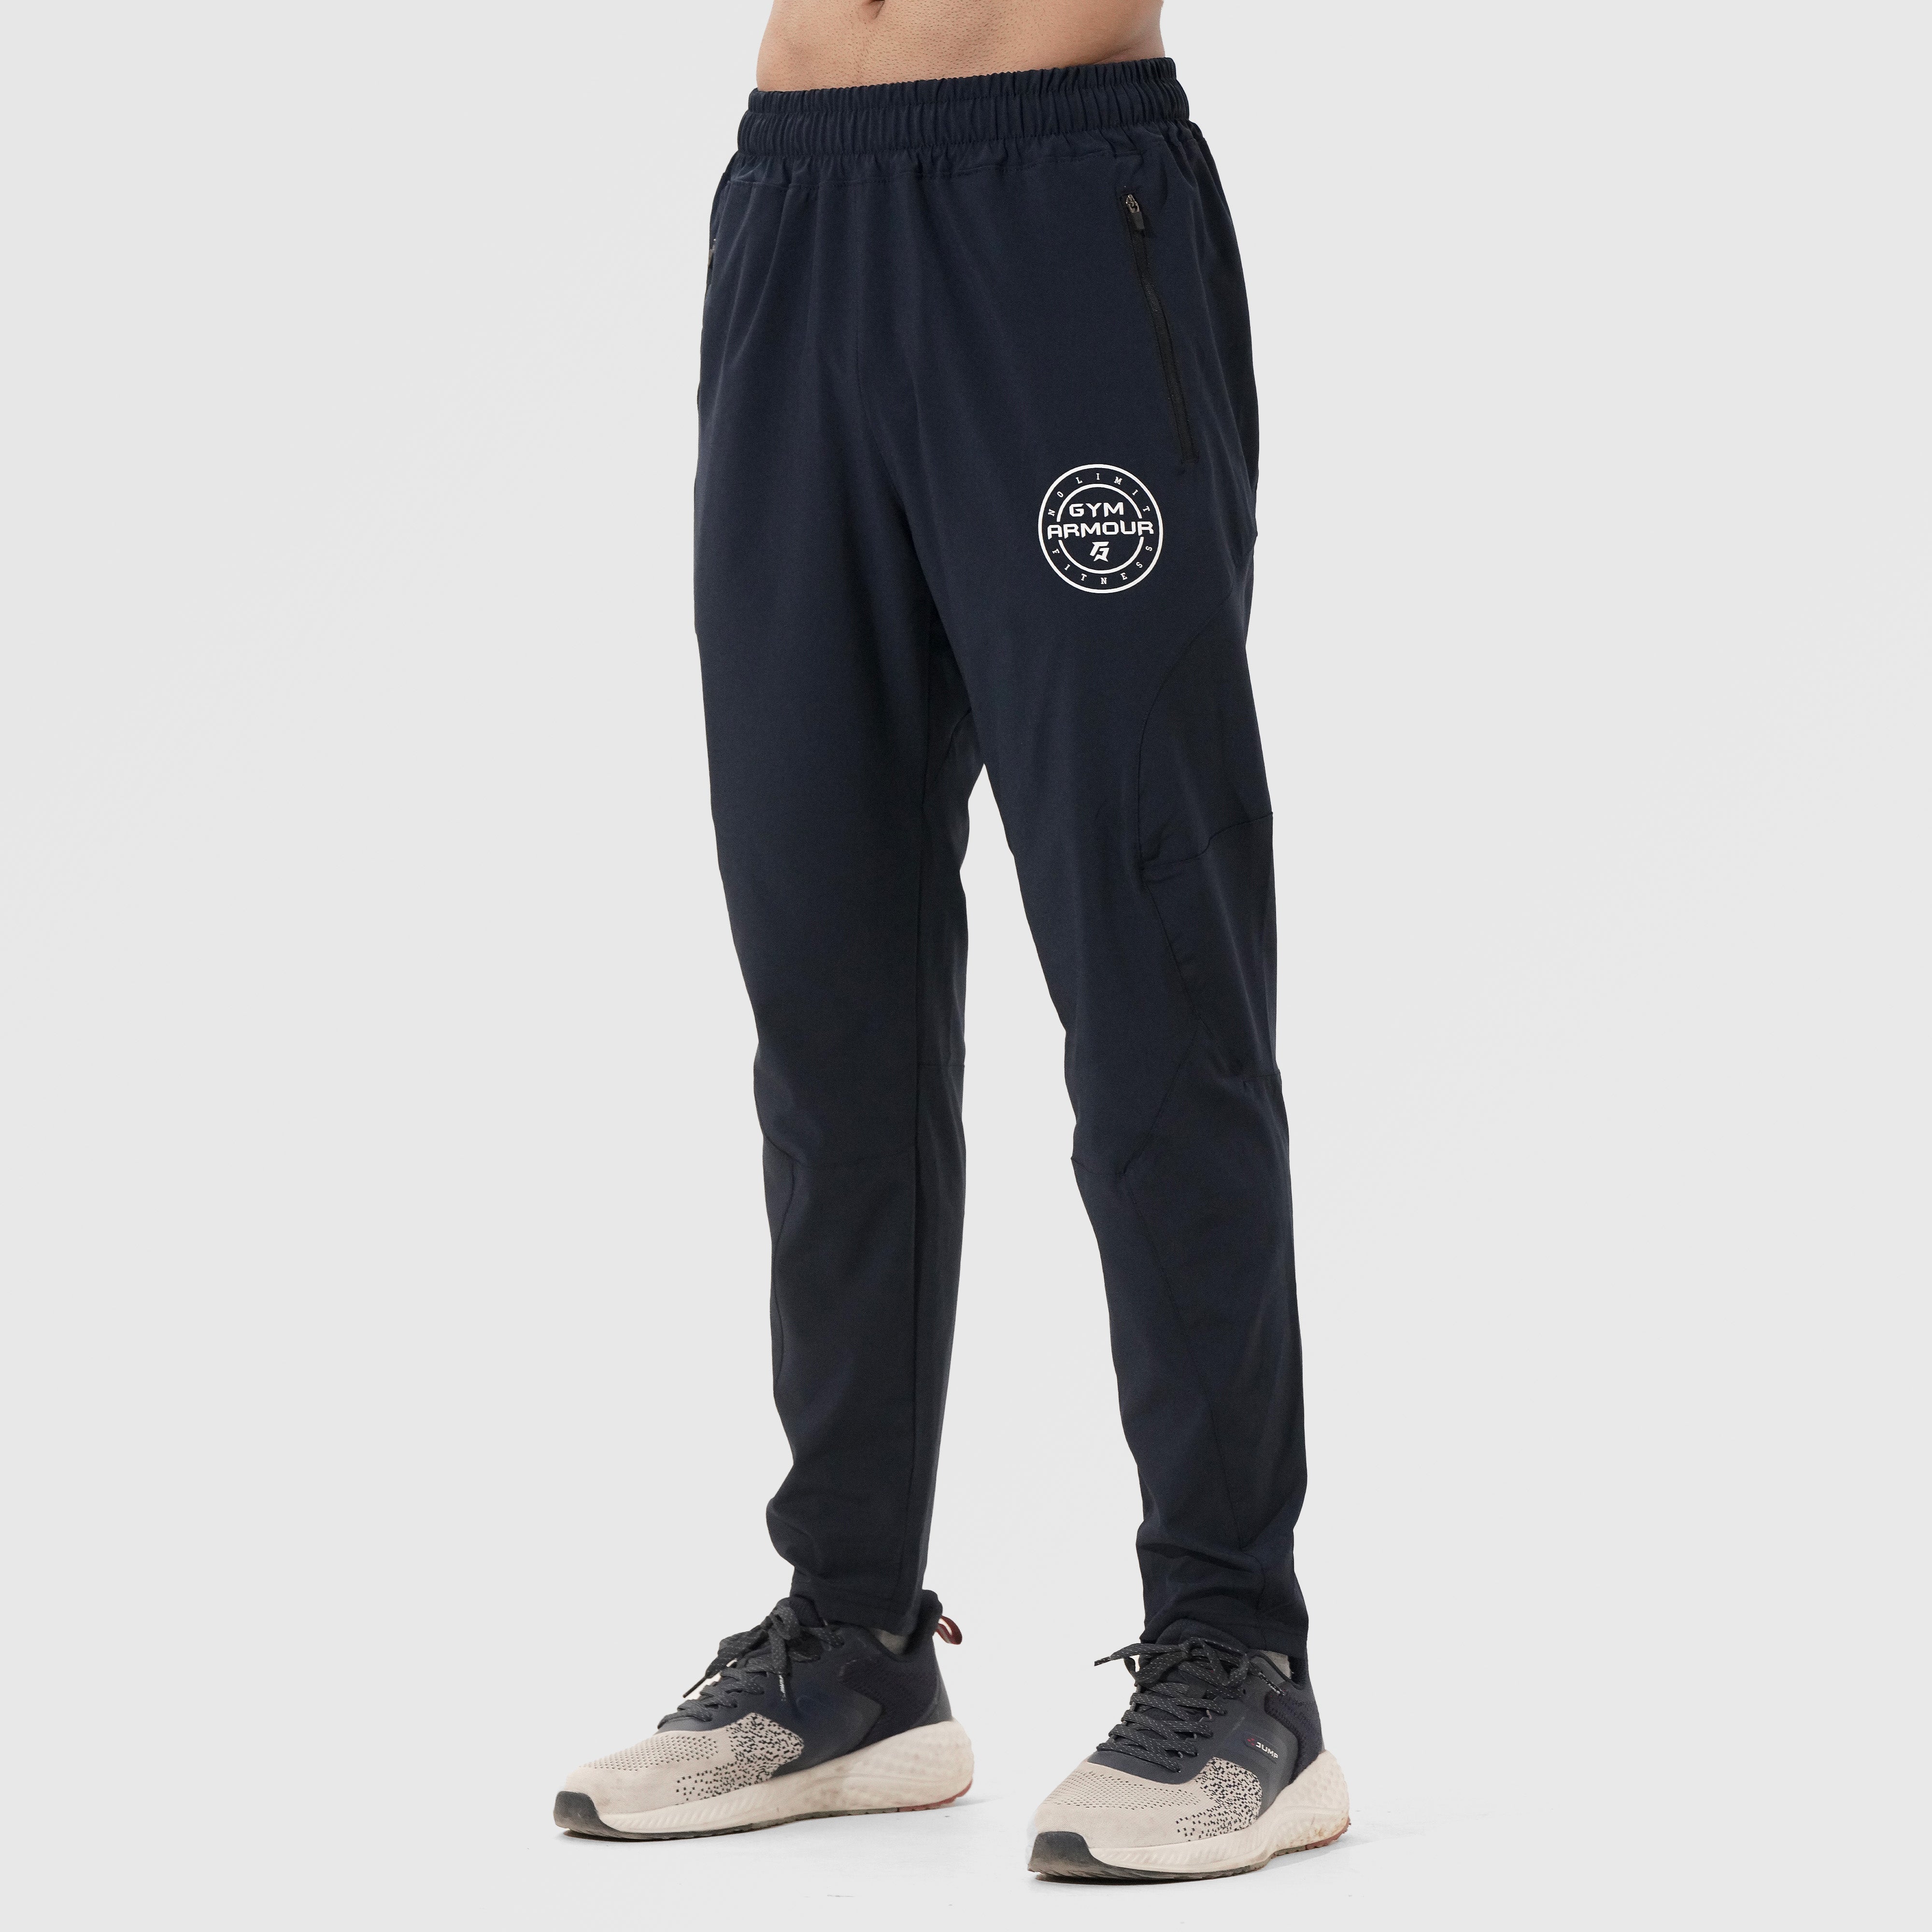 Elte Trousers (Navy)